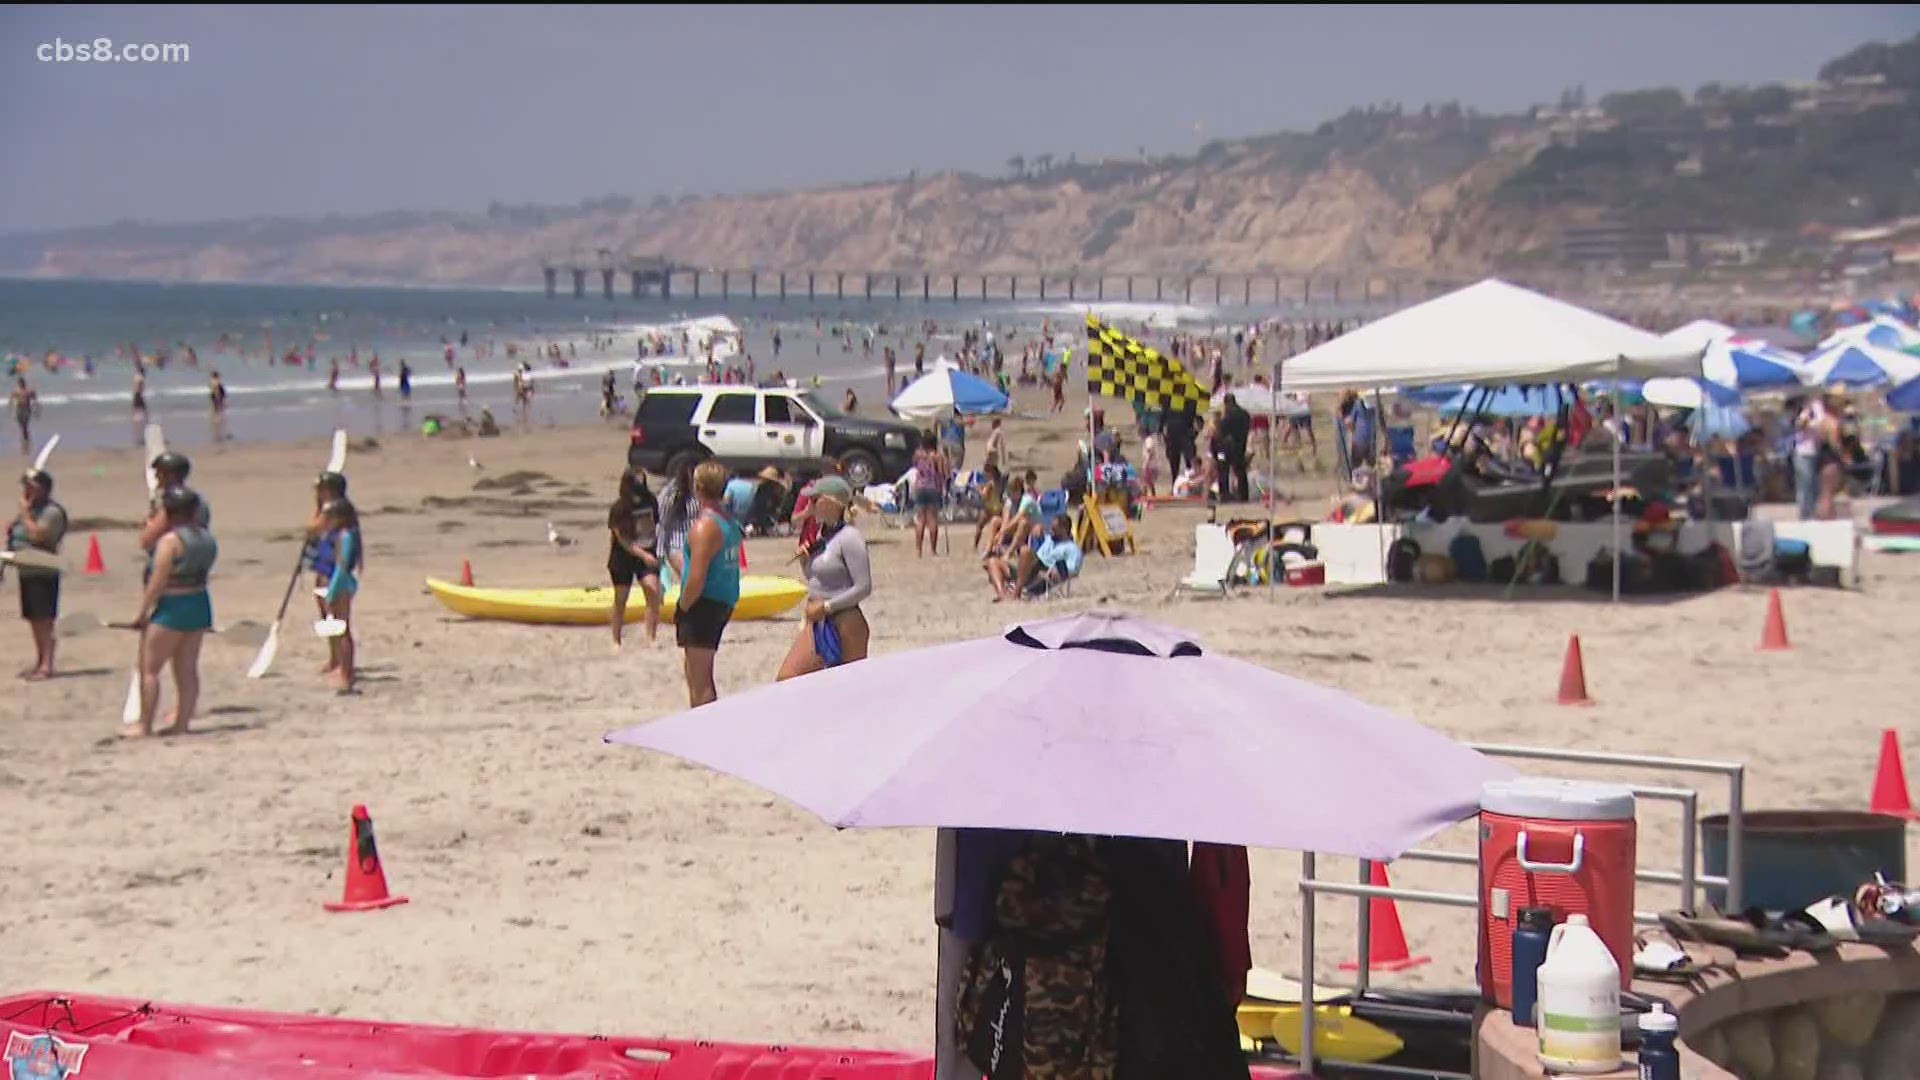 Large crowds flocked to San Diego beaches Friday at the start of the Fourth of July weekend as positive coronavirus cases surged throughout the county.